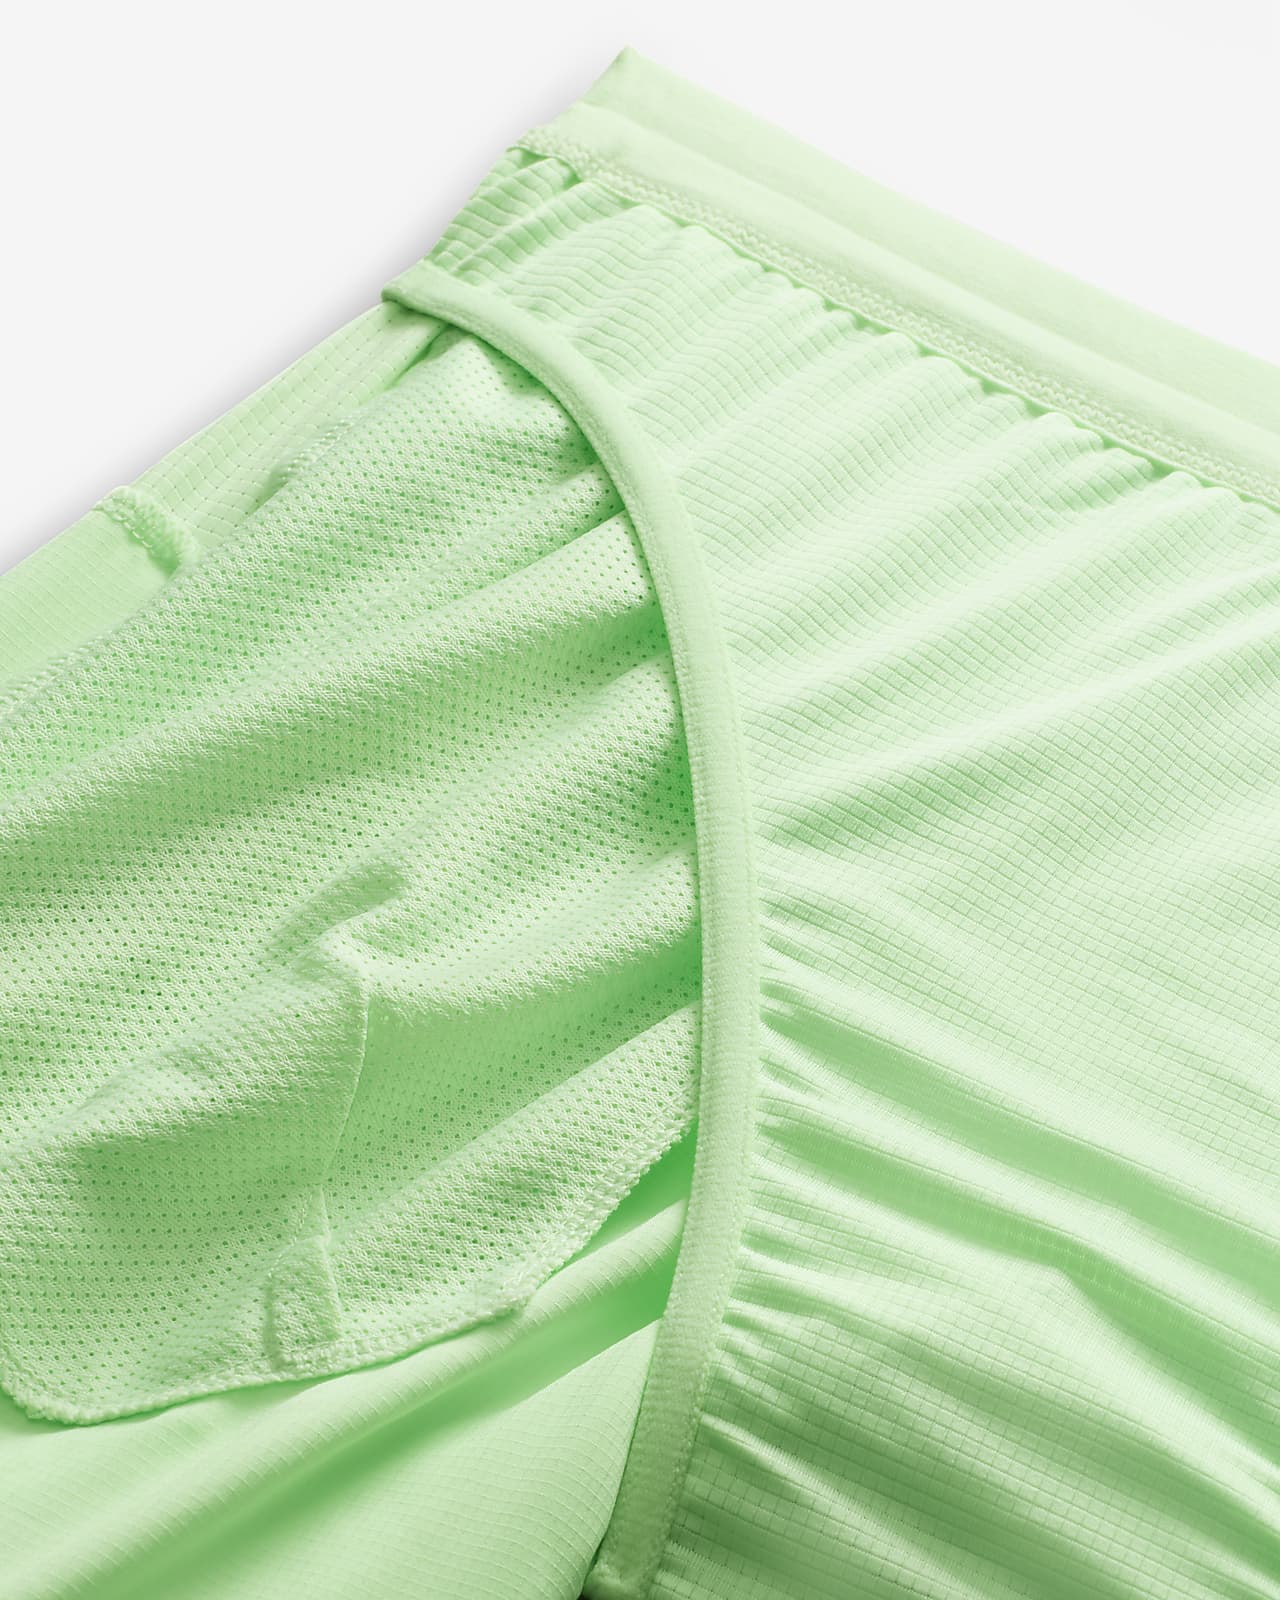 Nike Challenger Flash Men's Dri-FIT 13cm (approx.) Brief-Lined Running  Shorts. Nike CA